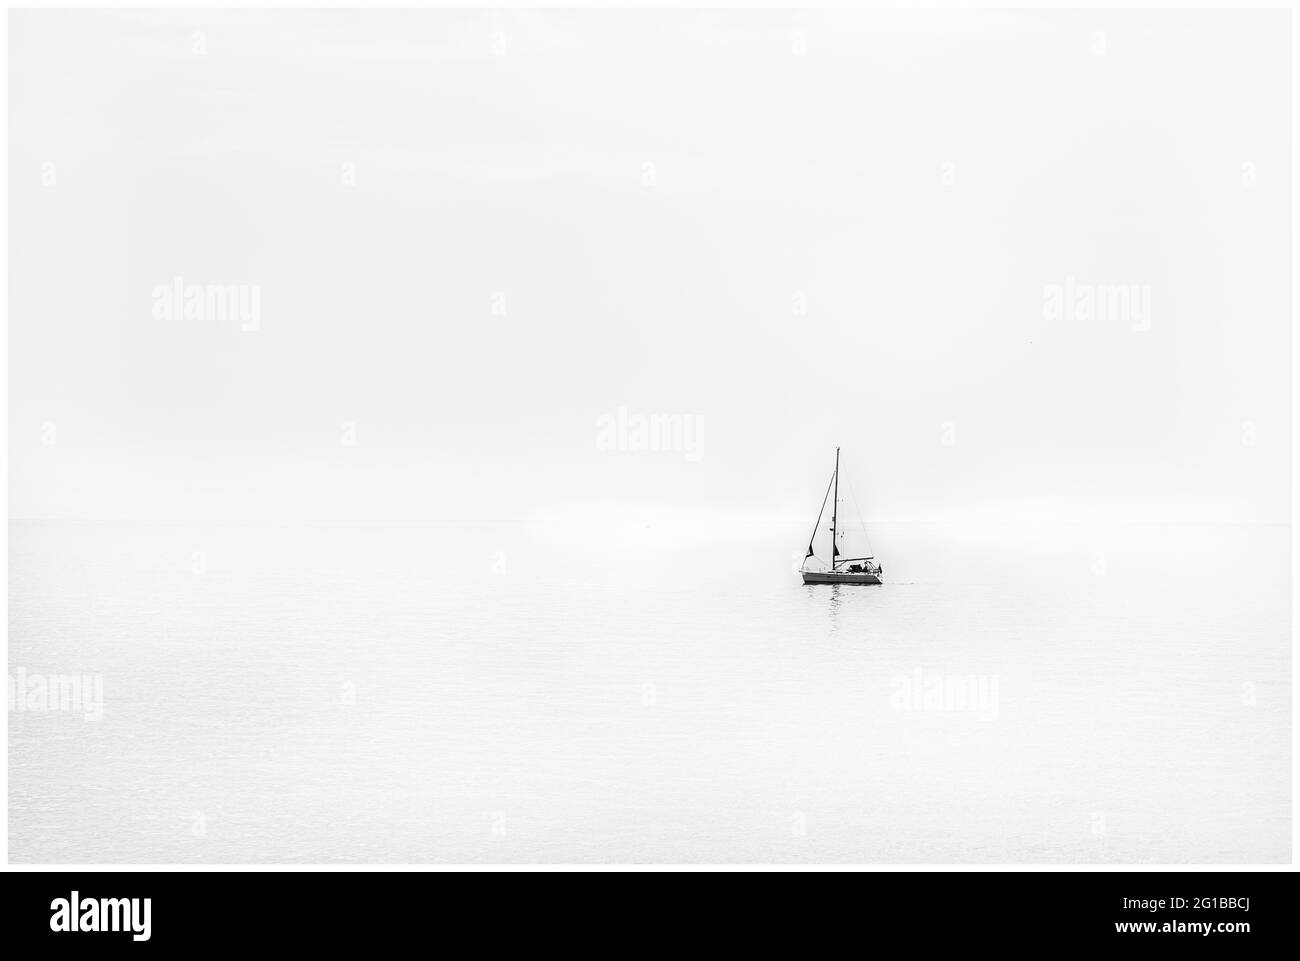 Sailboat at sea on calm day serenity tranquil peaceful Stock Photo